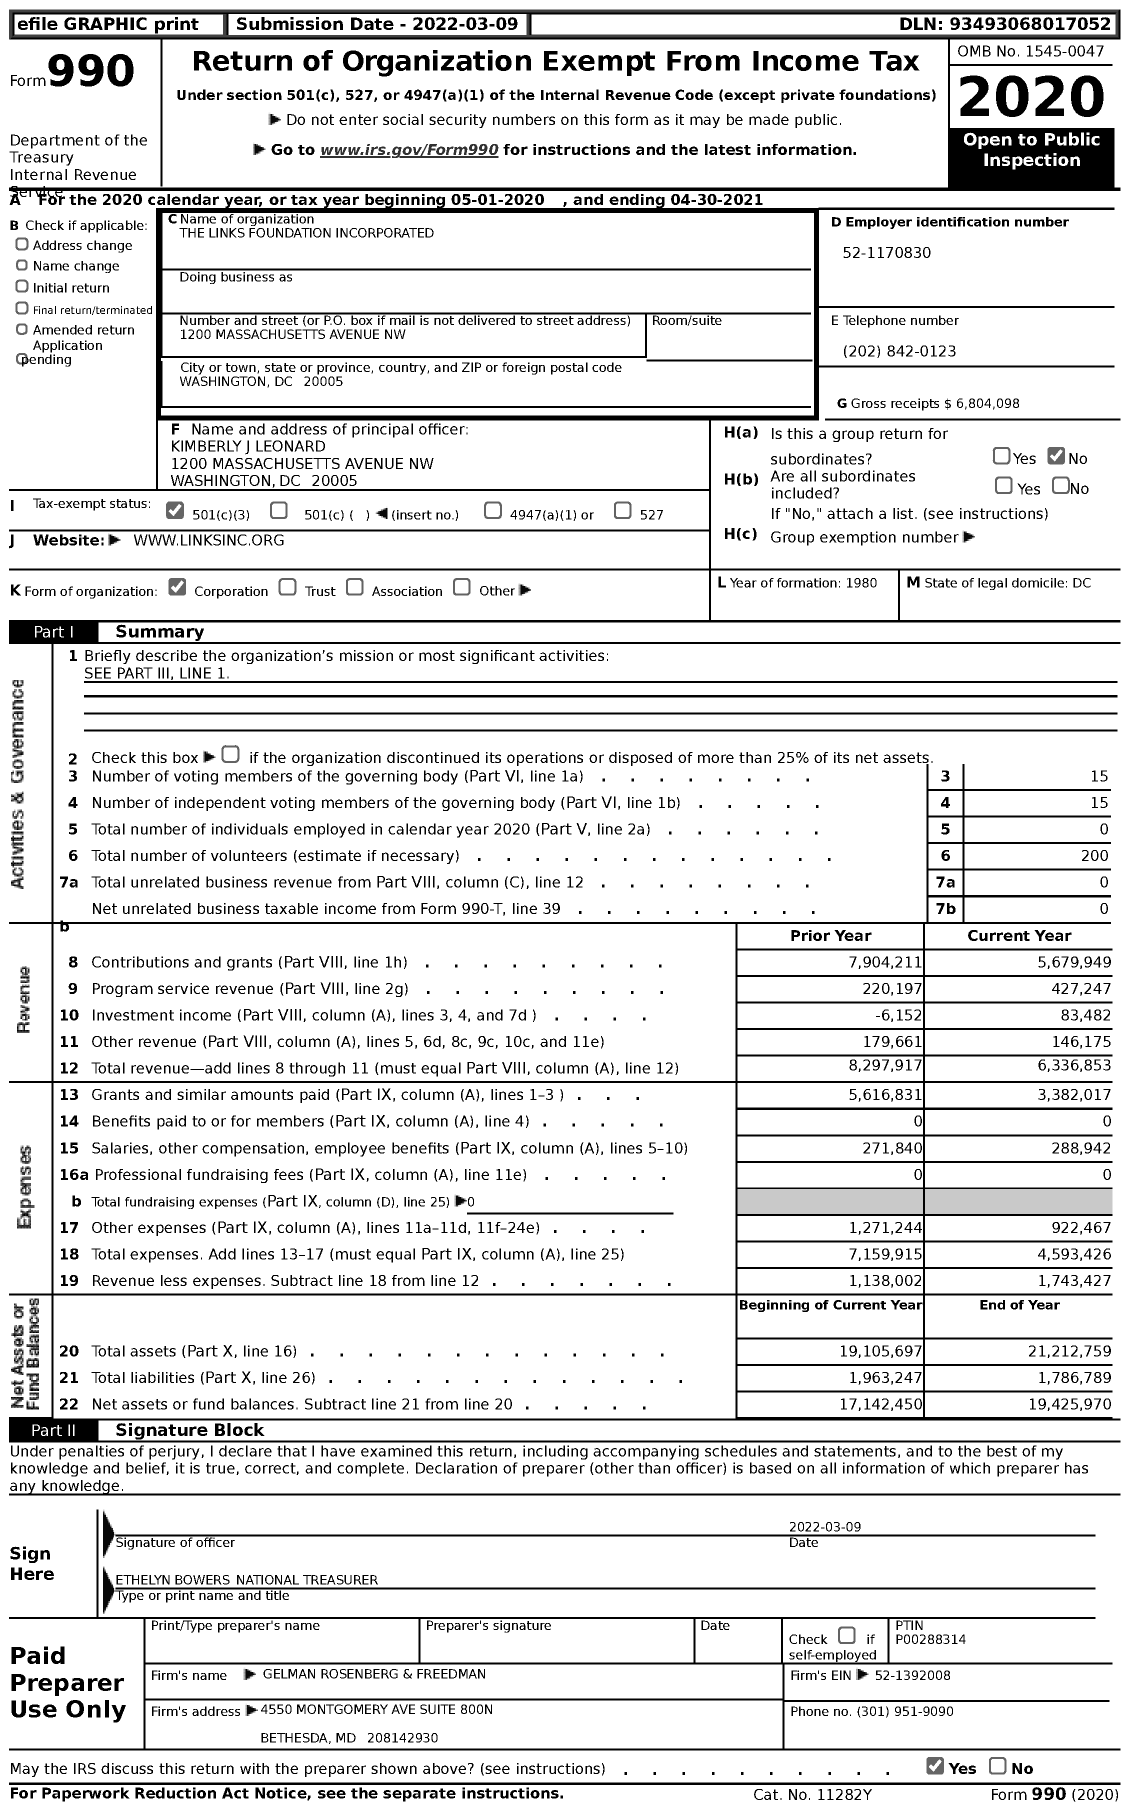 Image of first page of 2020 Form 990 for The Links Foundation Incorporated